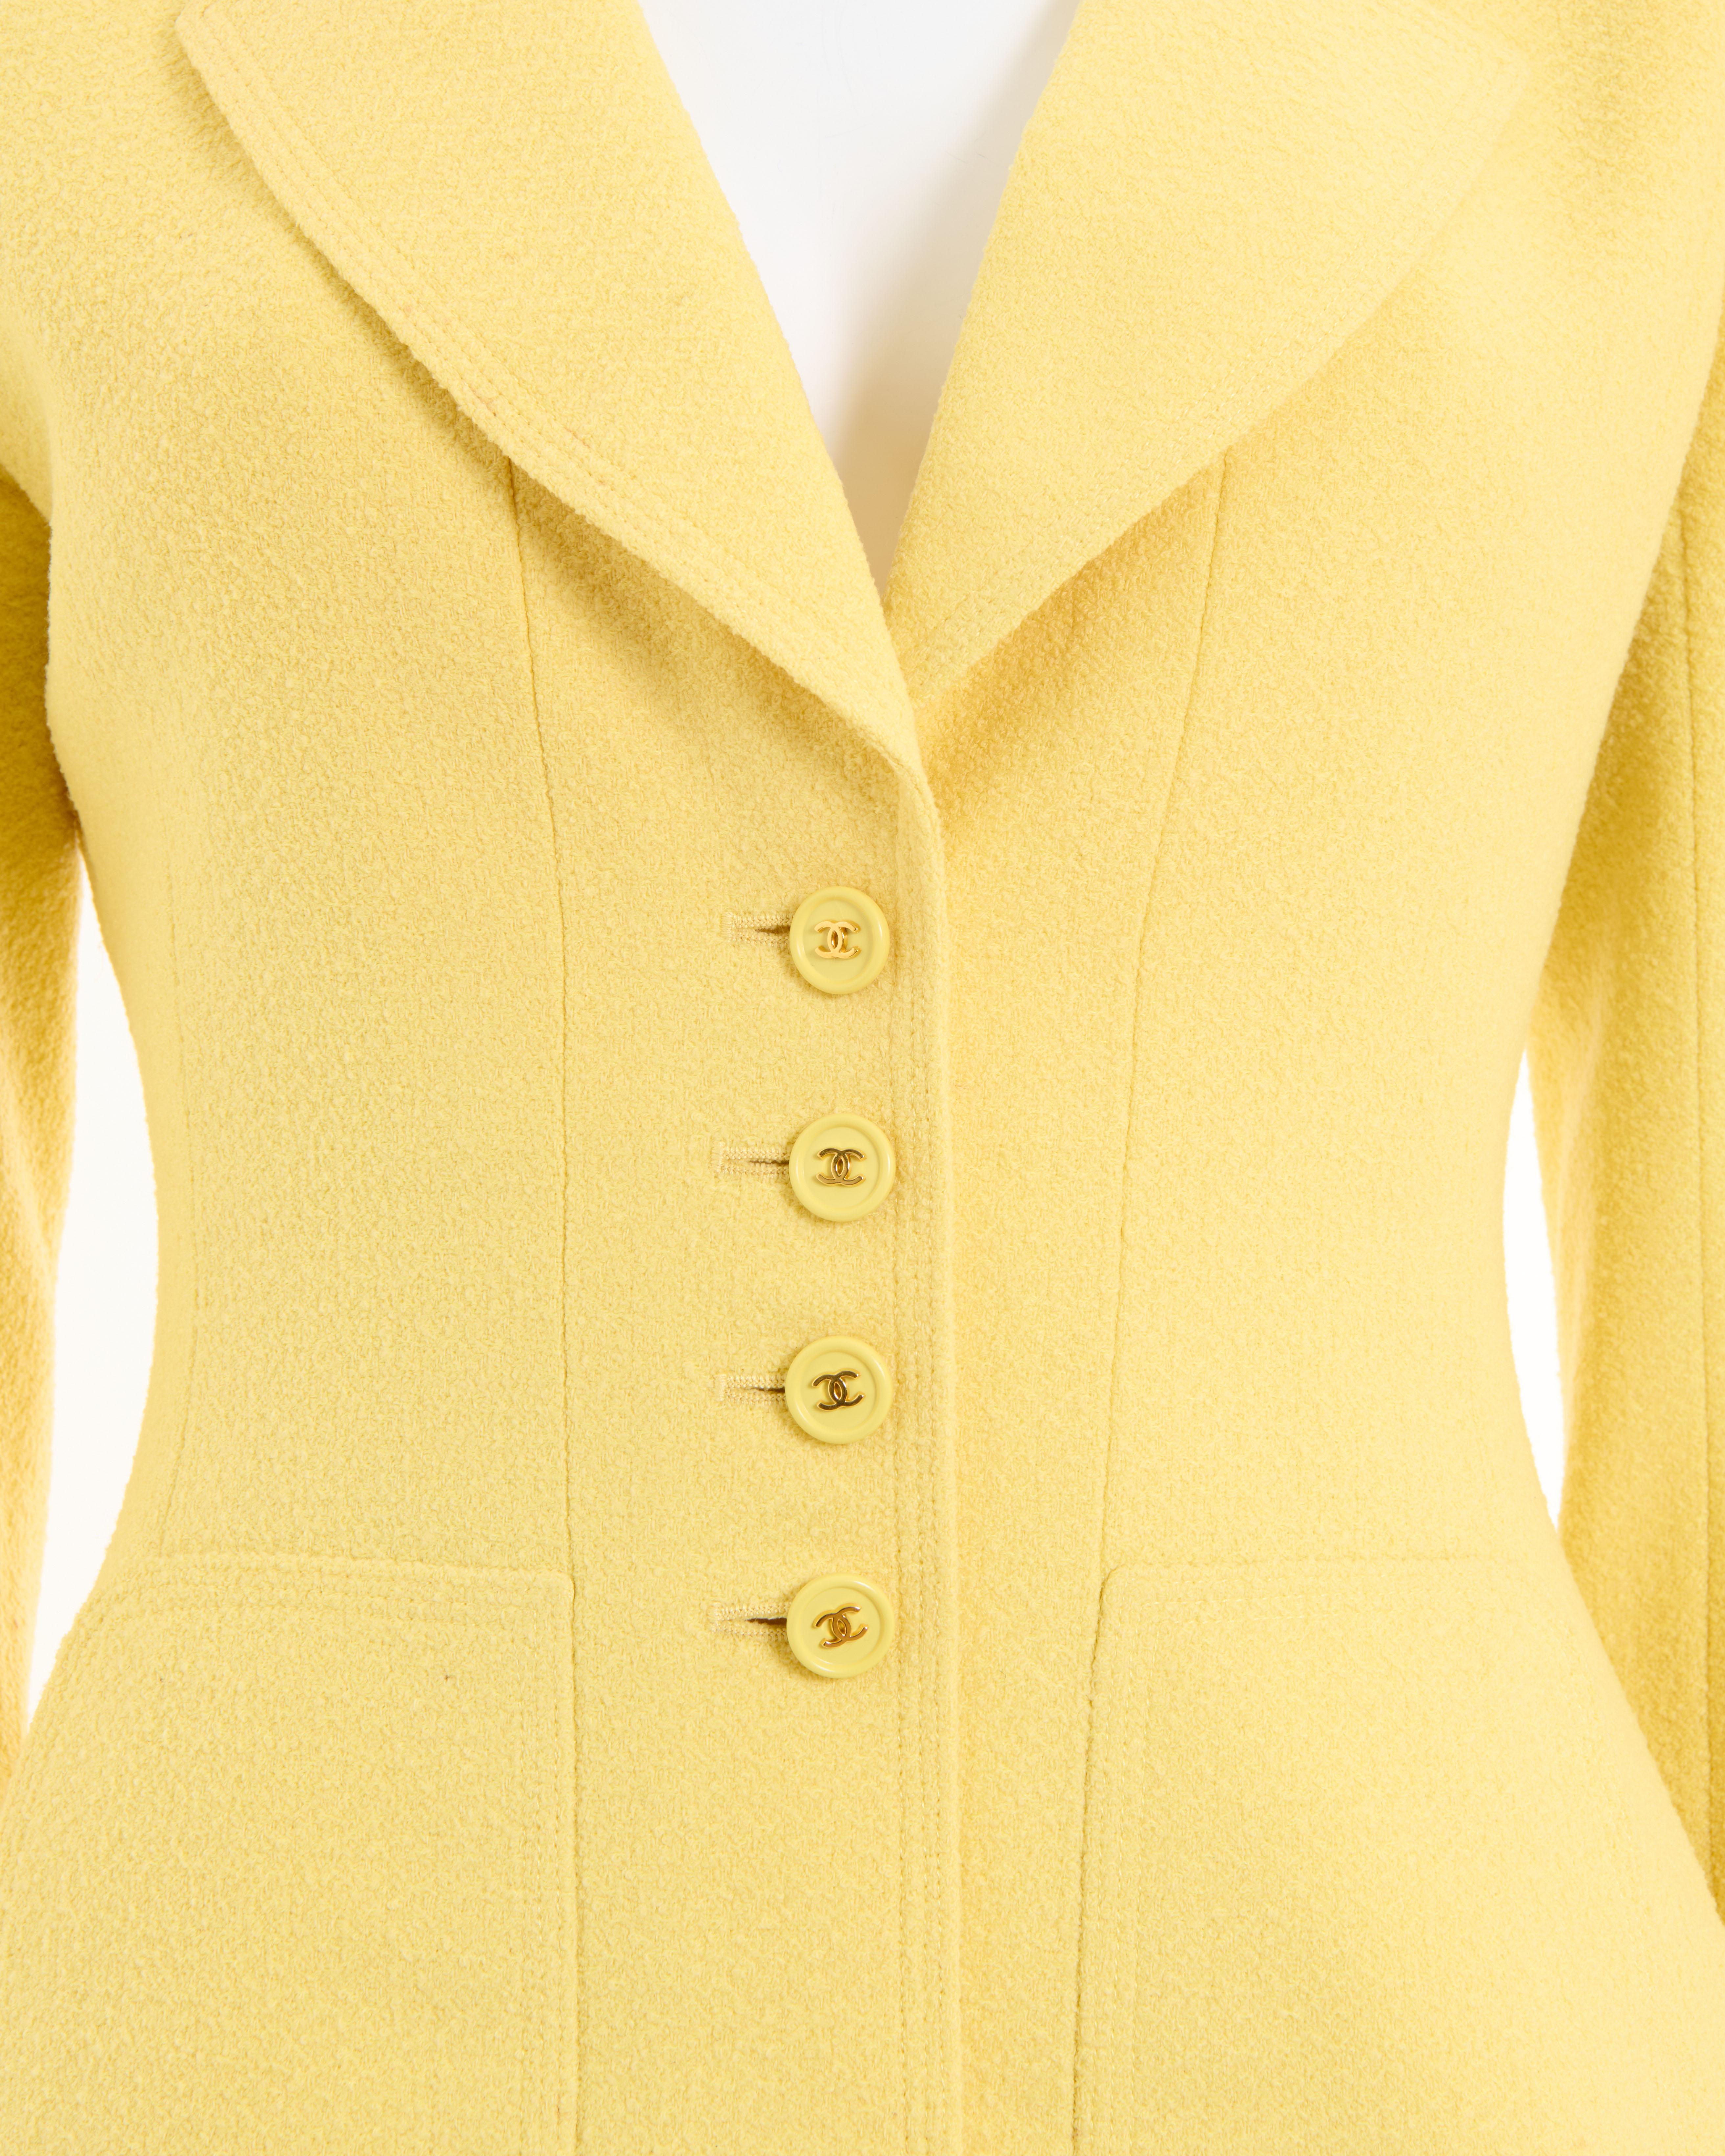 Chanel by Karl Lagerfeld S/S 1997 Yellow CC logo fitted jacket  For Sale 1